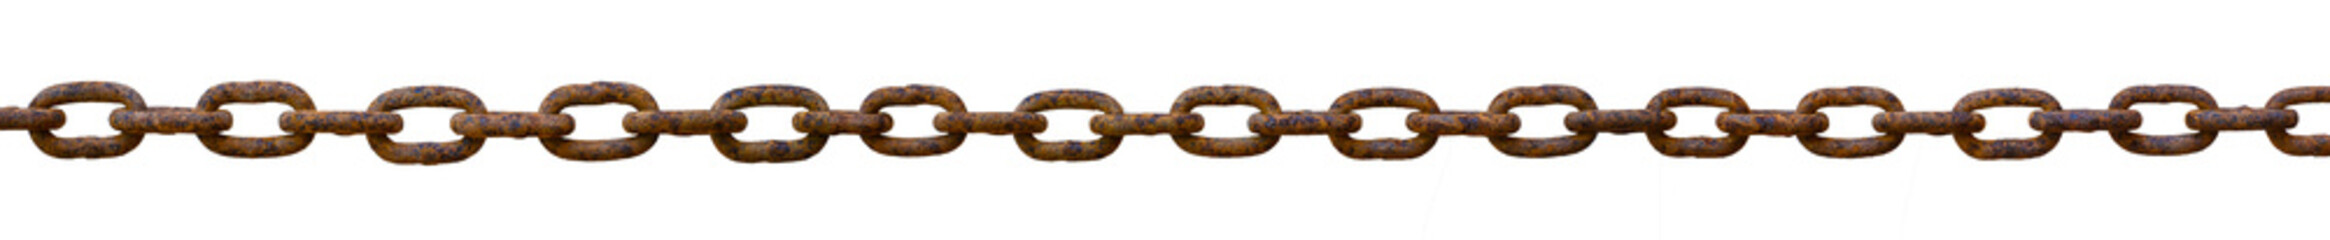 Old rusted metal chain Placed in a straight line on an isolated white background